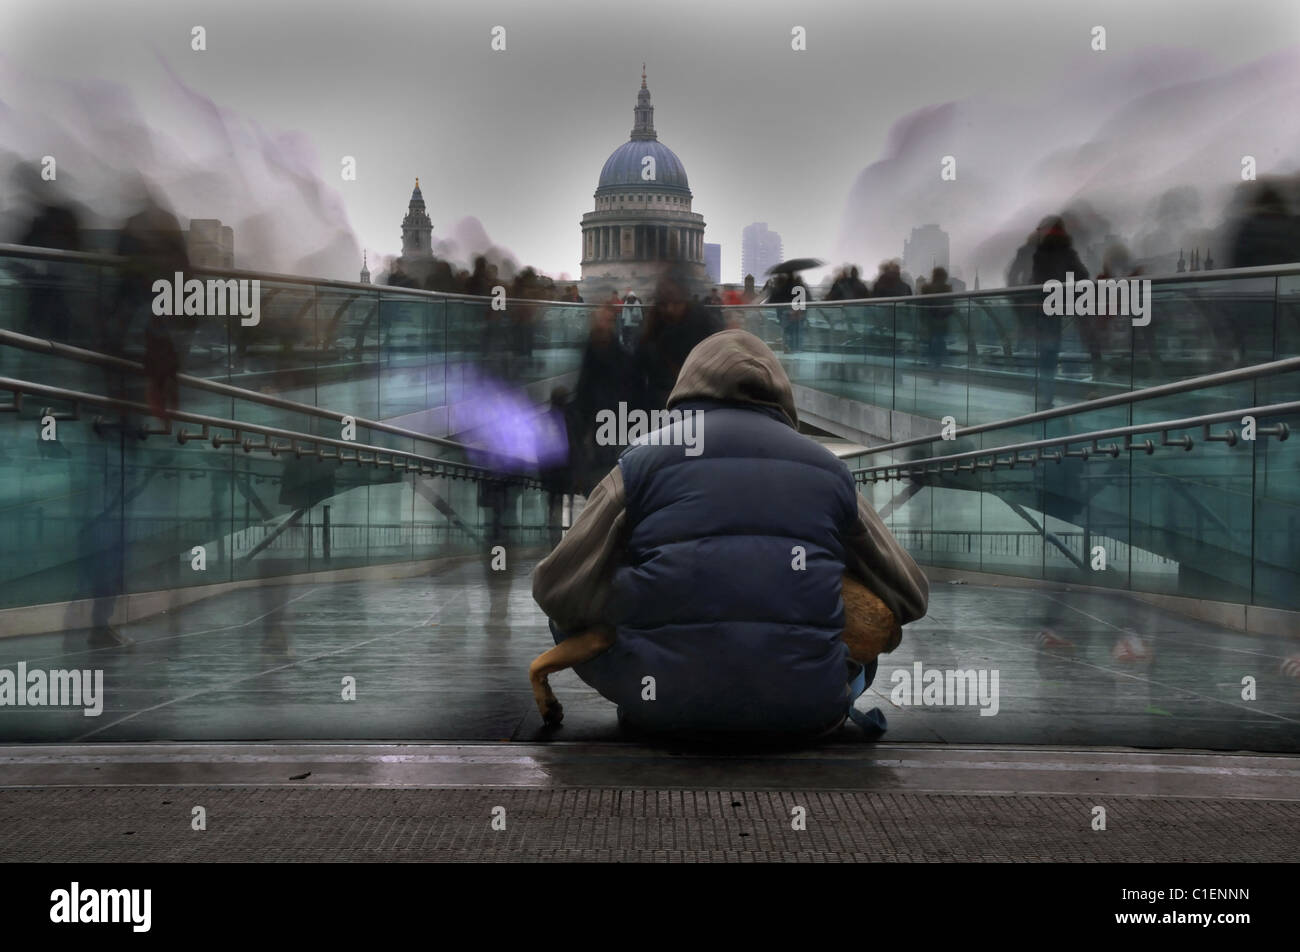 A Homeless Man in Busy London Stock Photo